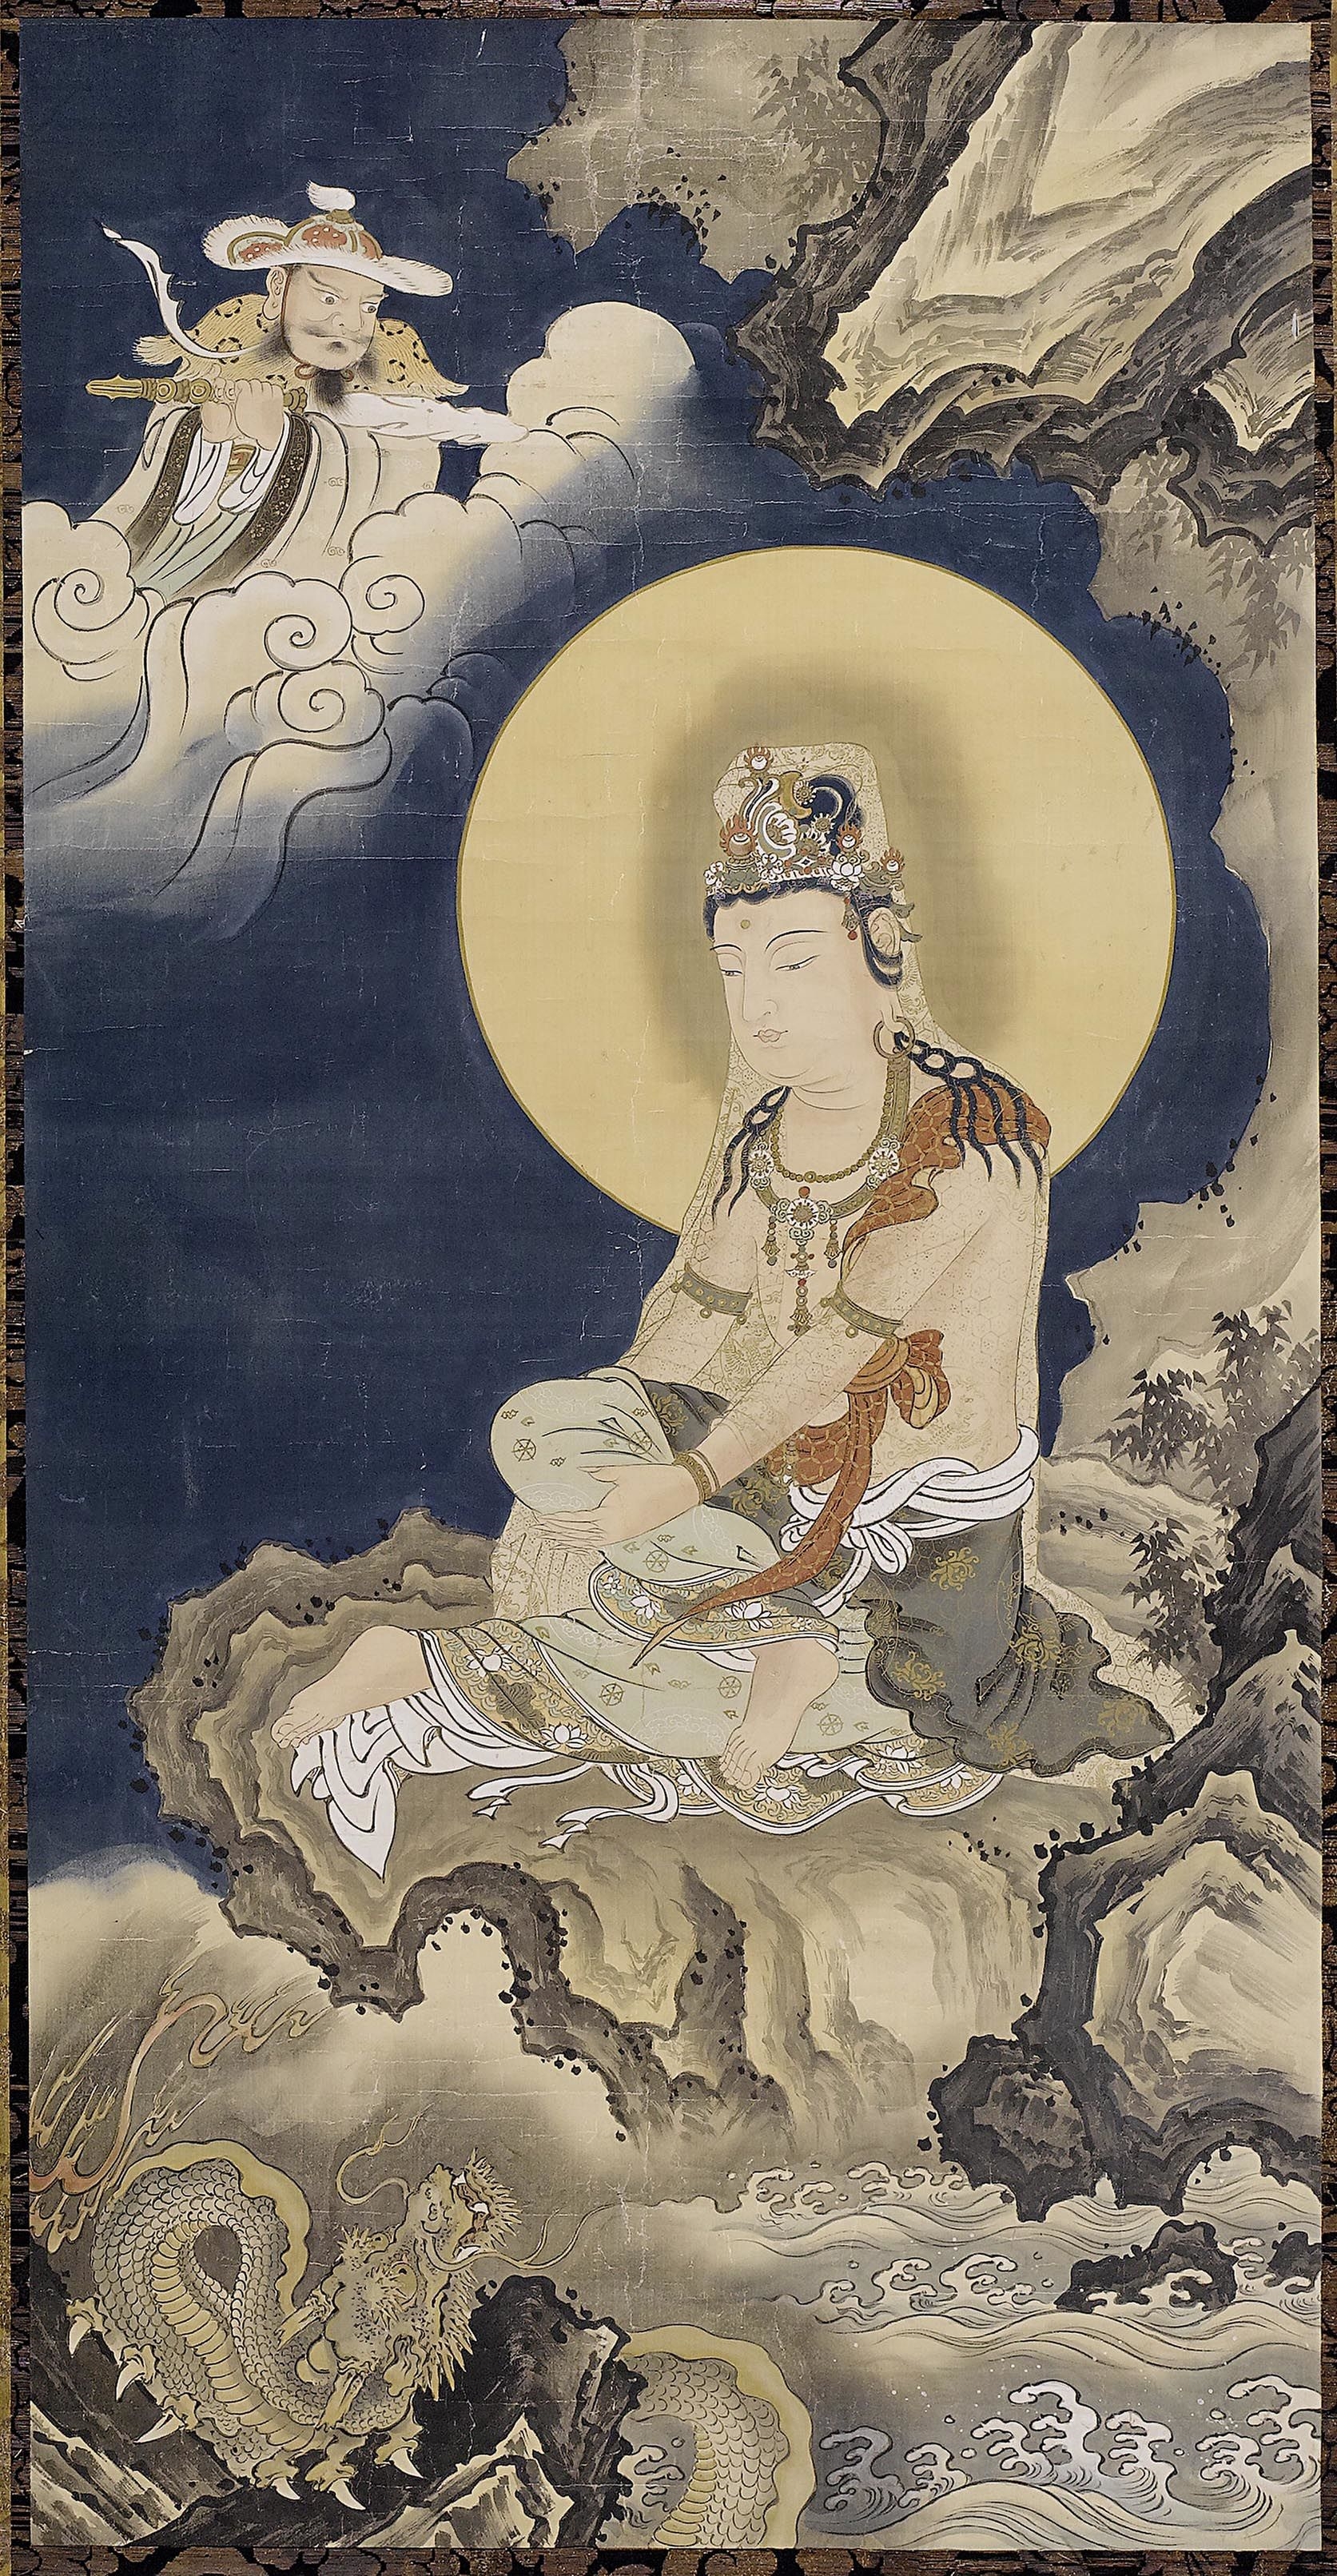 With the moon shining brightly in the background, Kannon is depicted seated on a rock, accompanied by a dragon. 